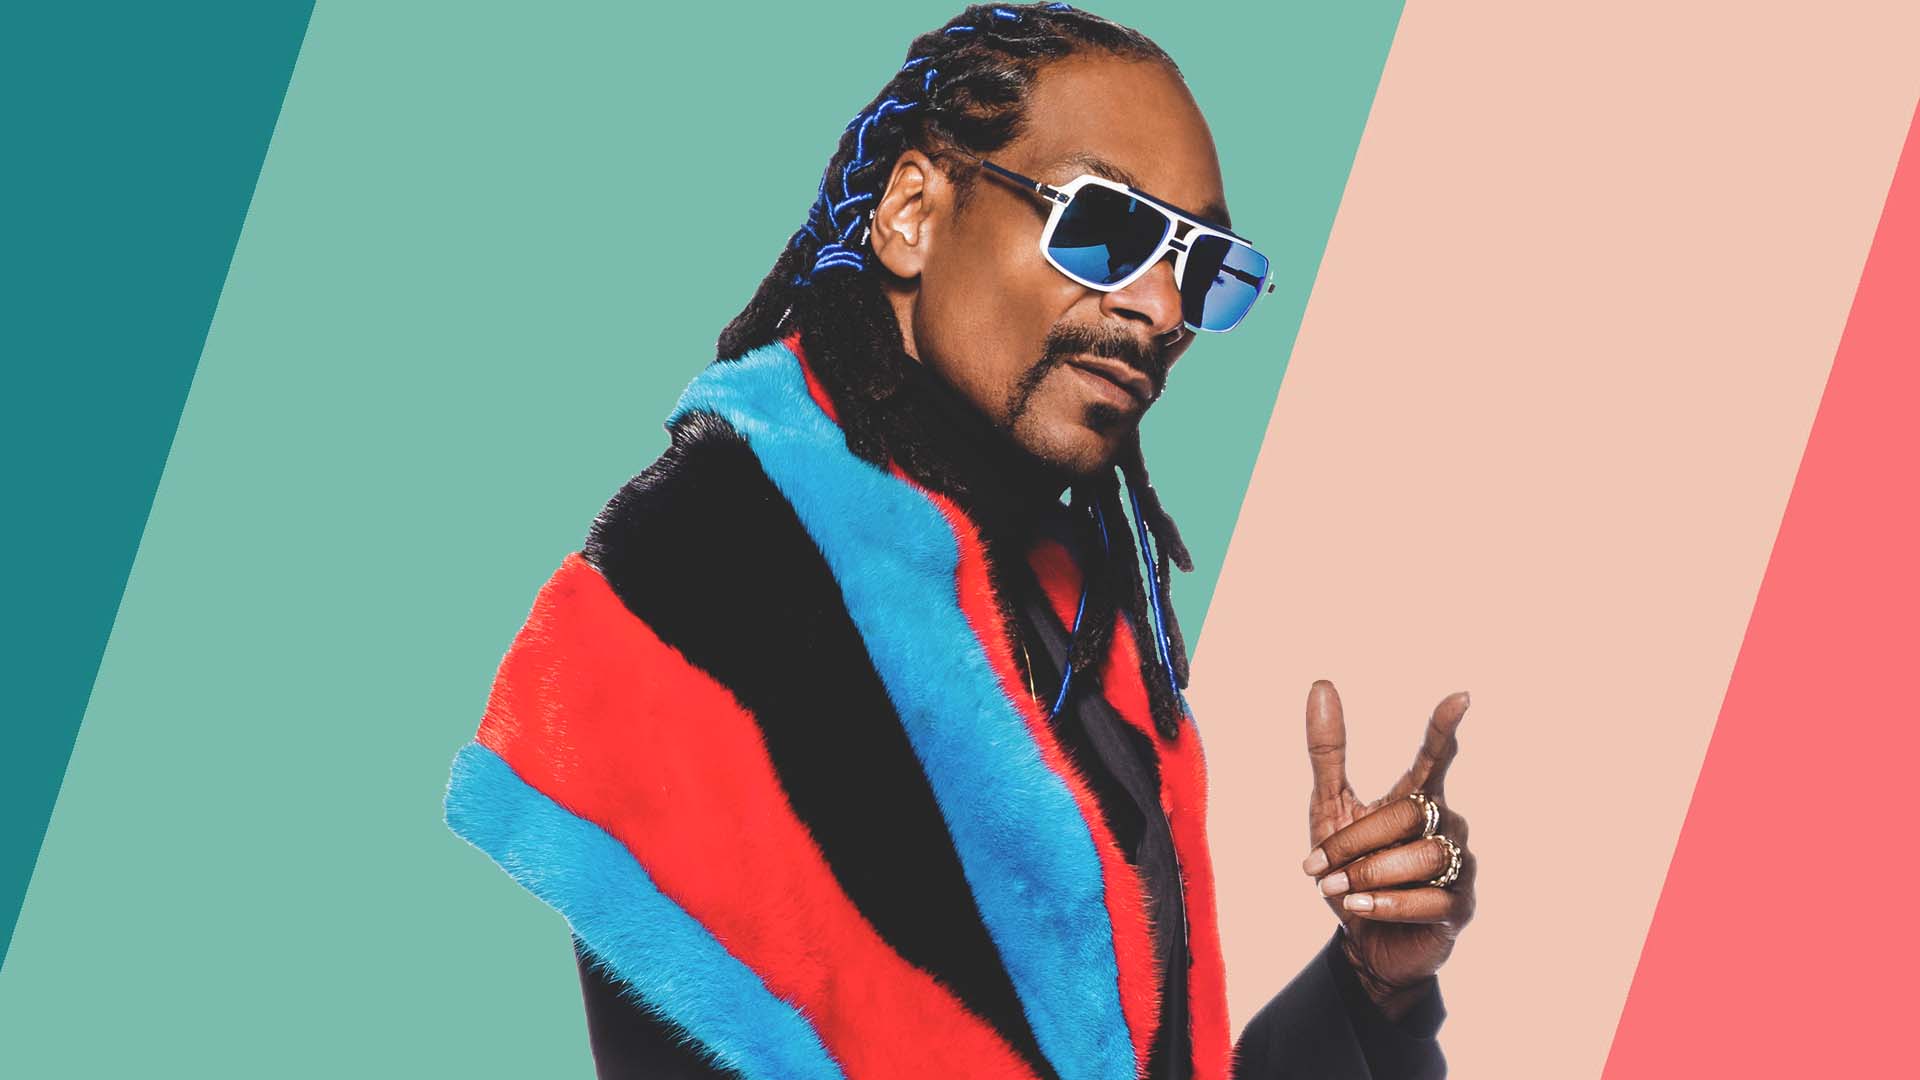 NFT collection on Cardano by rapper Snoop Dogg